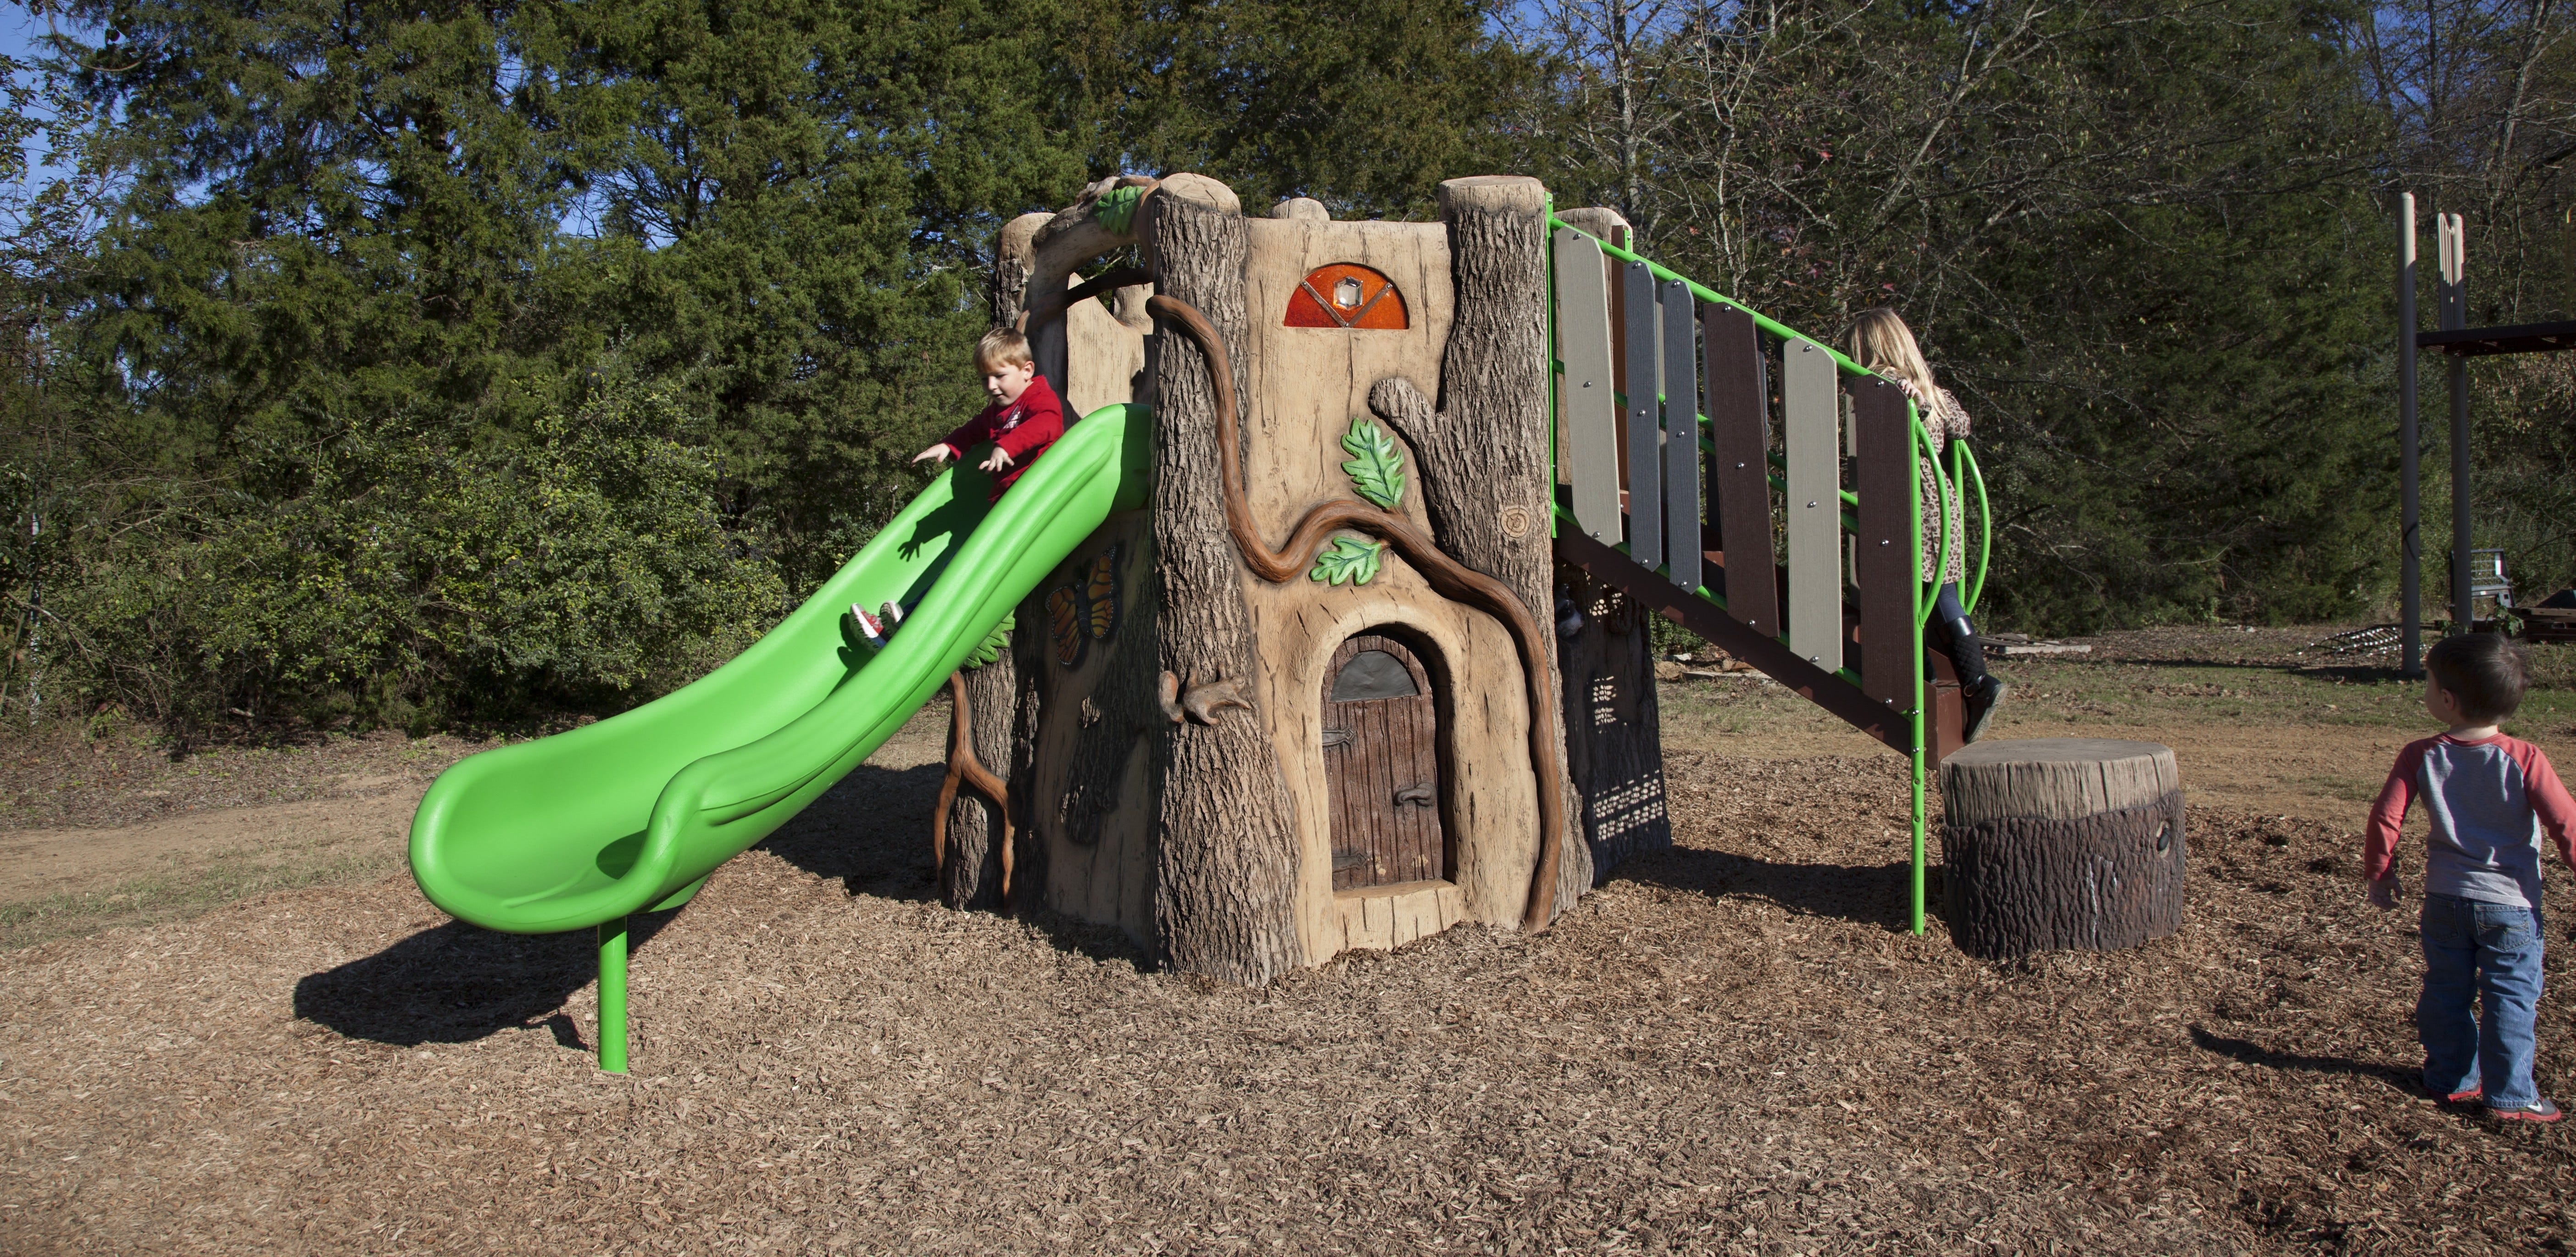 GameTime Introduces New Treehouse for Preschool Nature Playgrounds